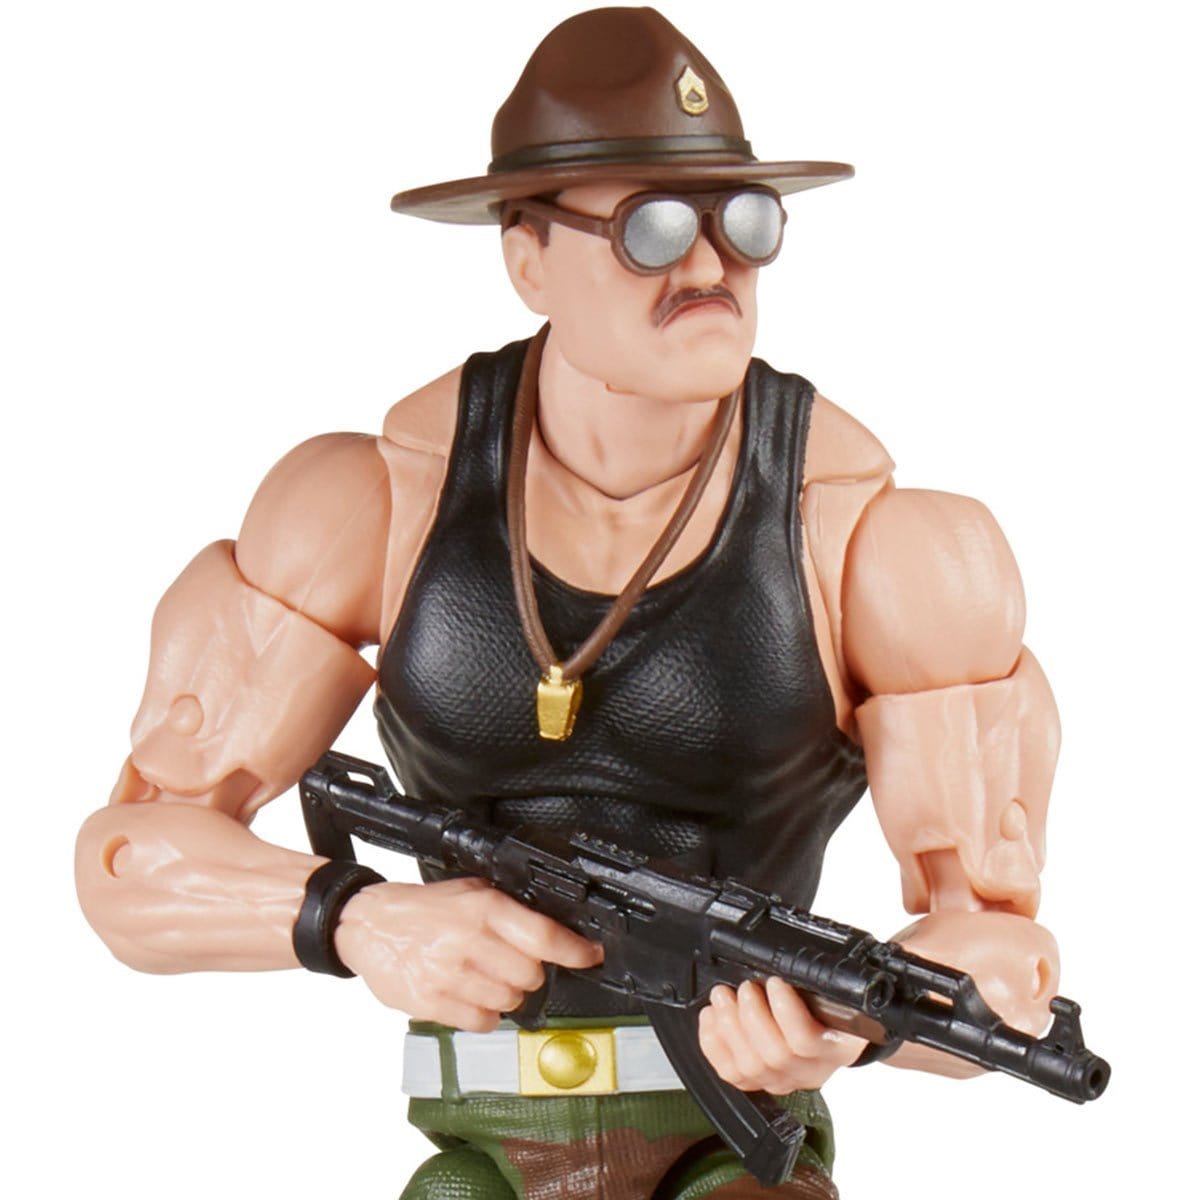 G.I. Joe Classified Series 6-Inch Sgt. Slaughter Action Figure - Exclusive - Pop-O-Loco - Hasbro